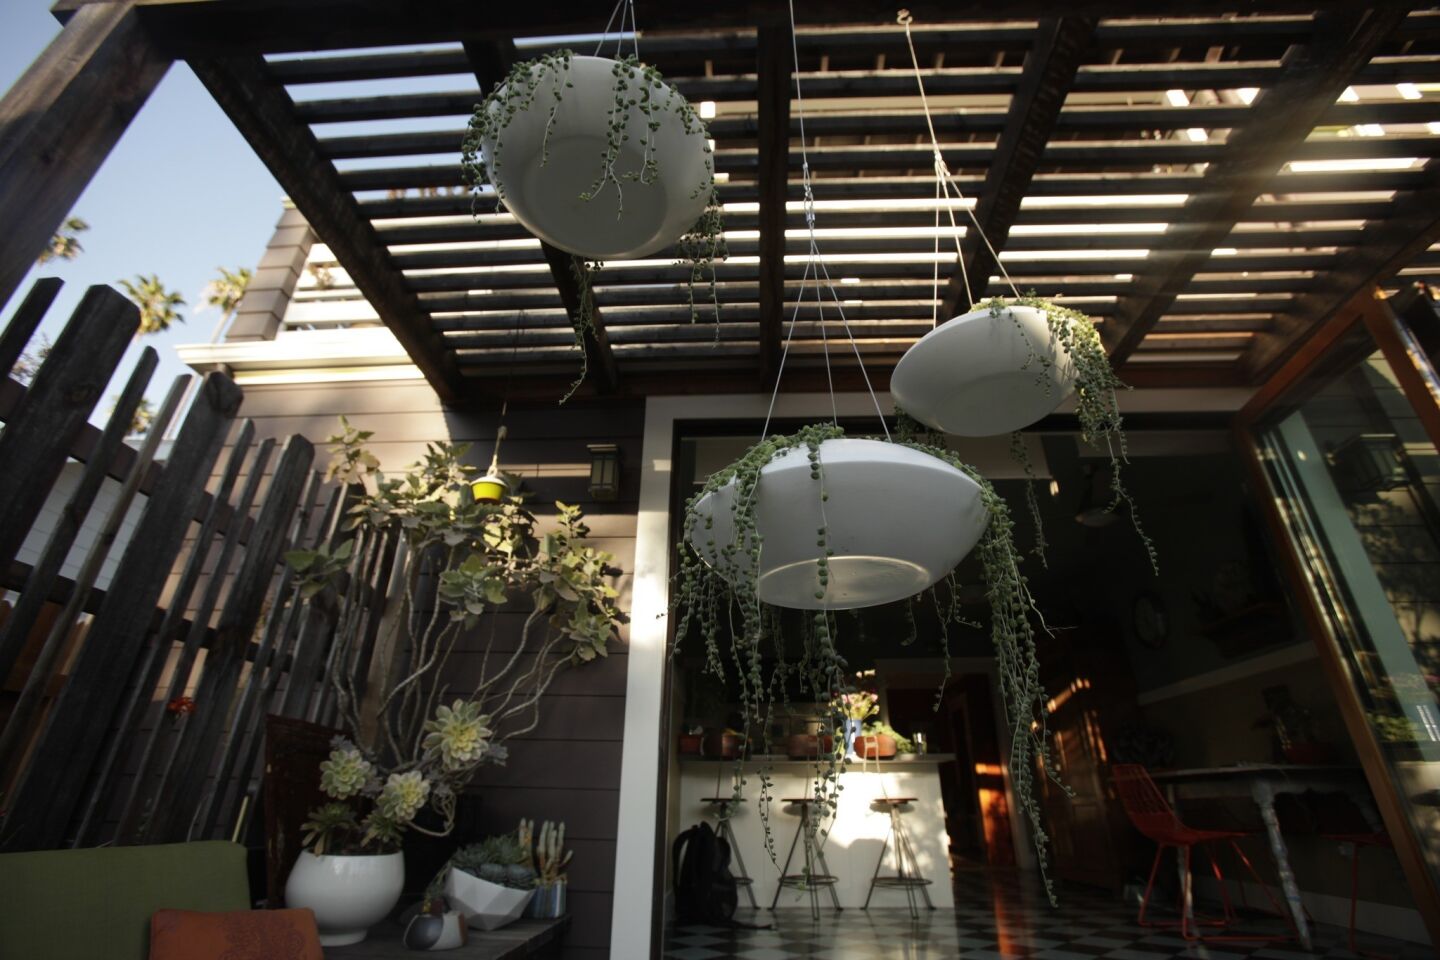 Succulents called string of pearls spill out of the ceramic Orbit hanging planters from Gutierrez's store.